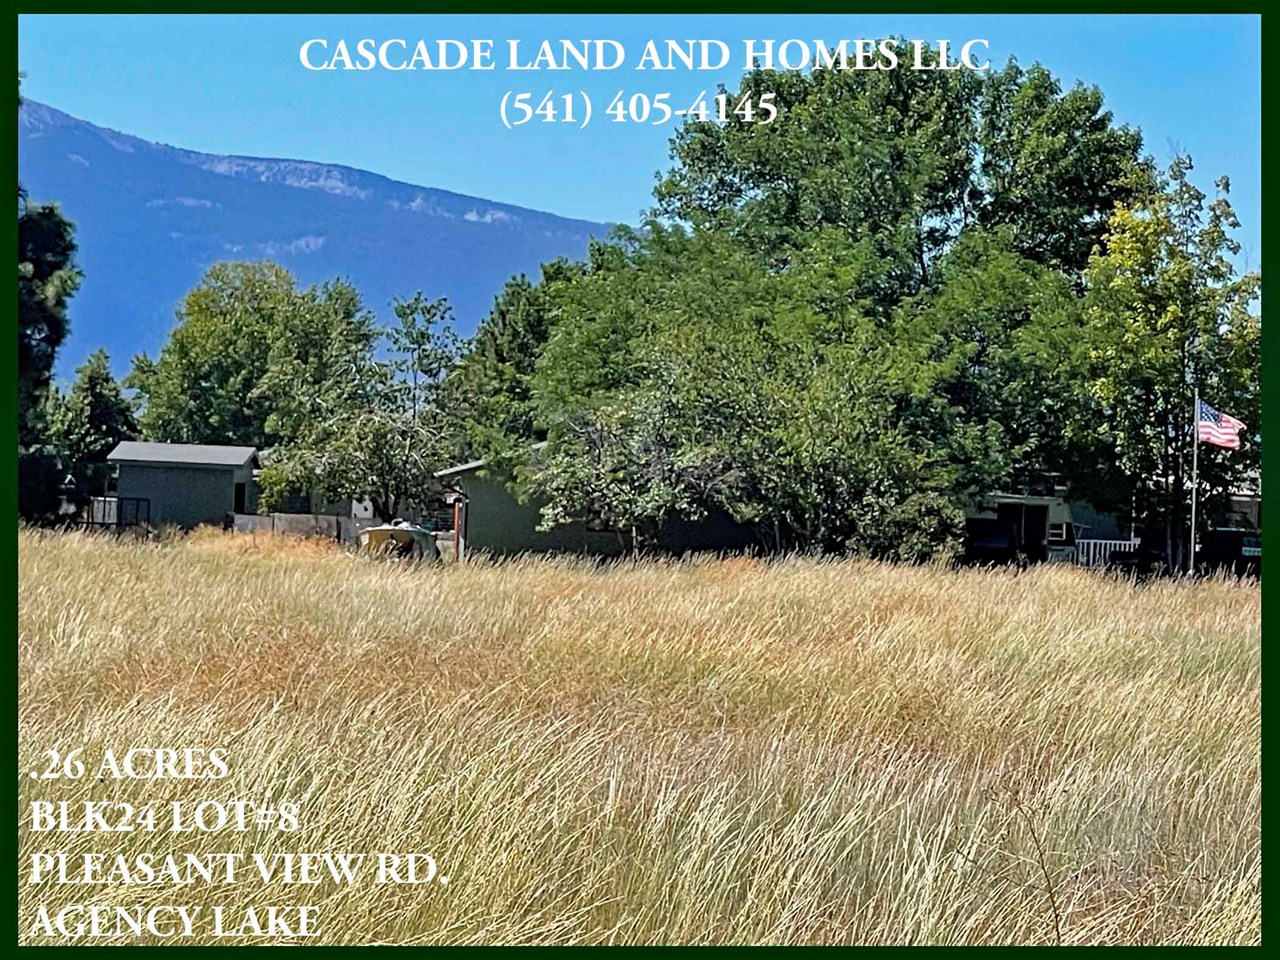 the property is covered in native grasses and is mostly cleared of brush and ready for a new owner! some areas here do allow modular homes, be sure and check with local jurisdictions for your plans.